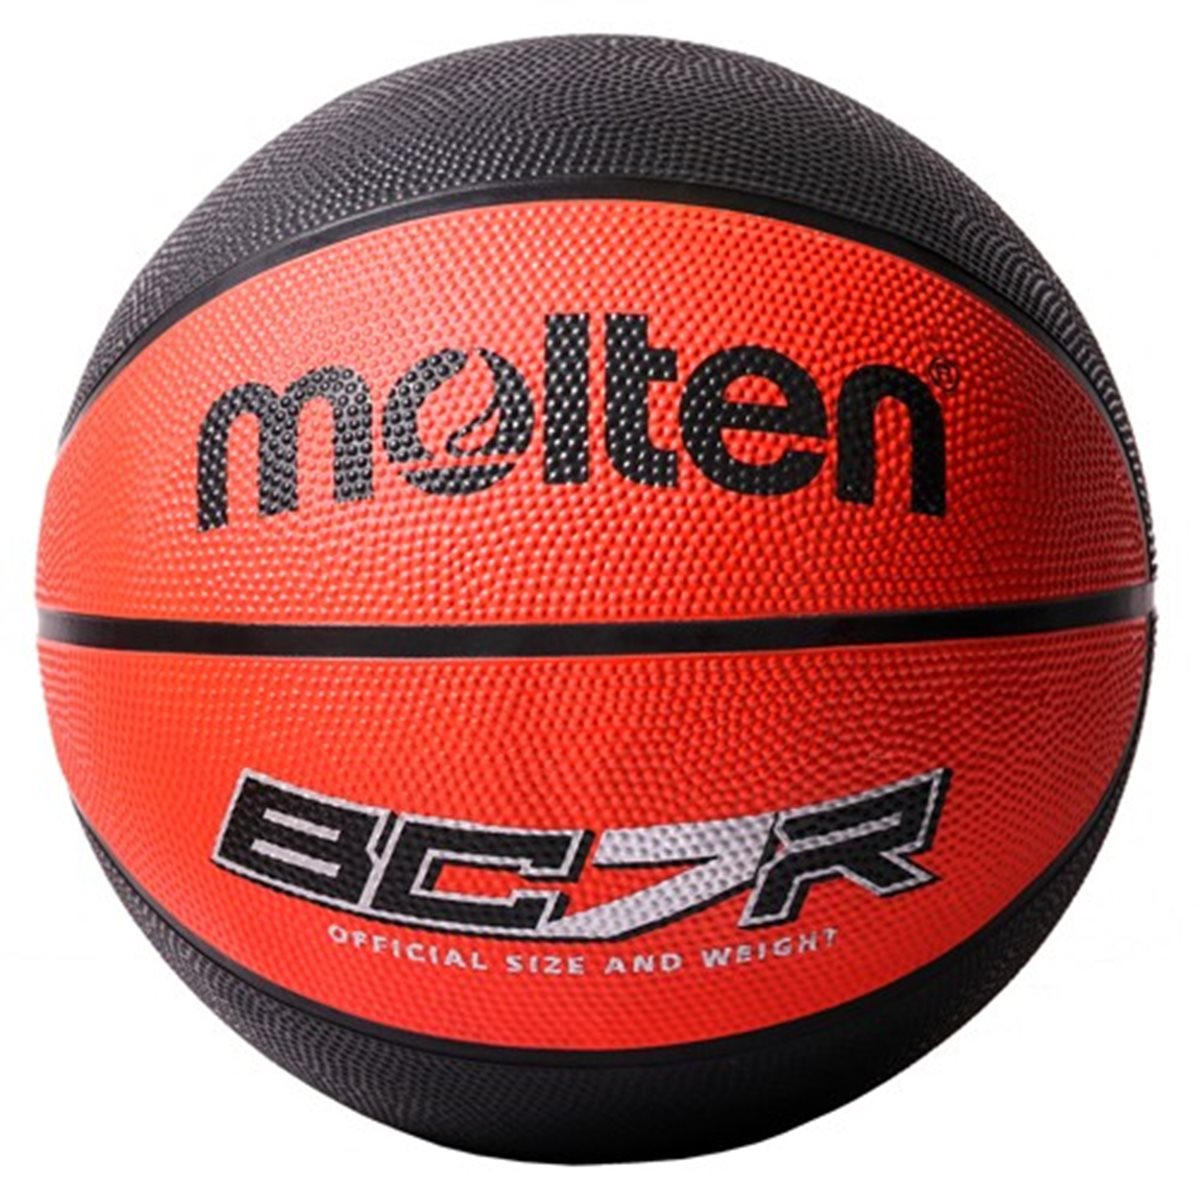 Red/Black 8 Panel Rubber Molten Basketball BC6R2-RK